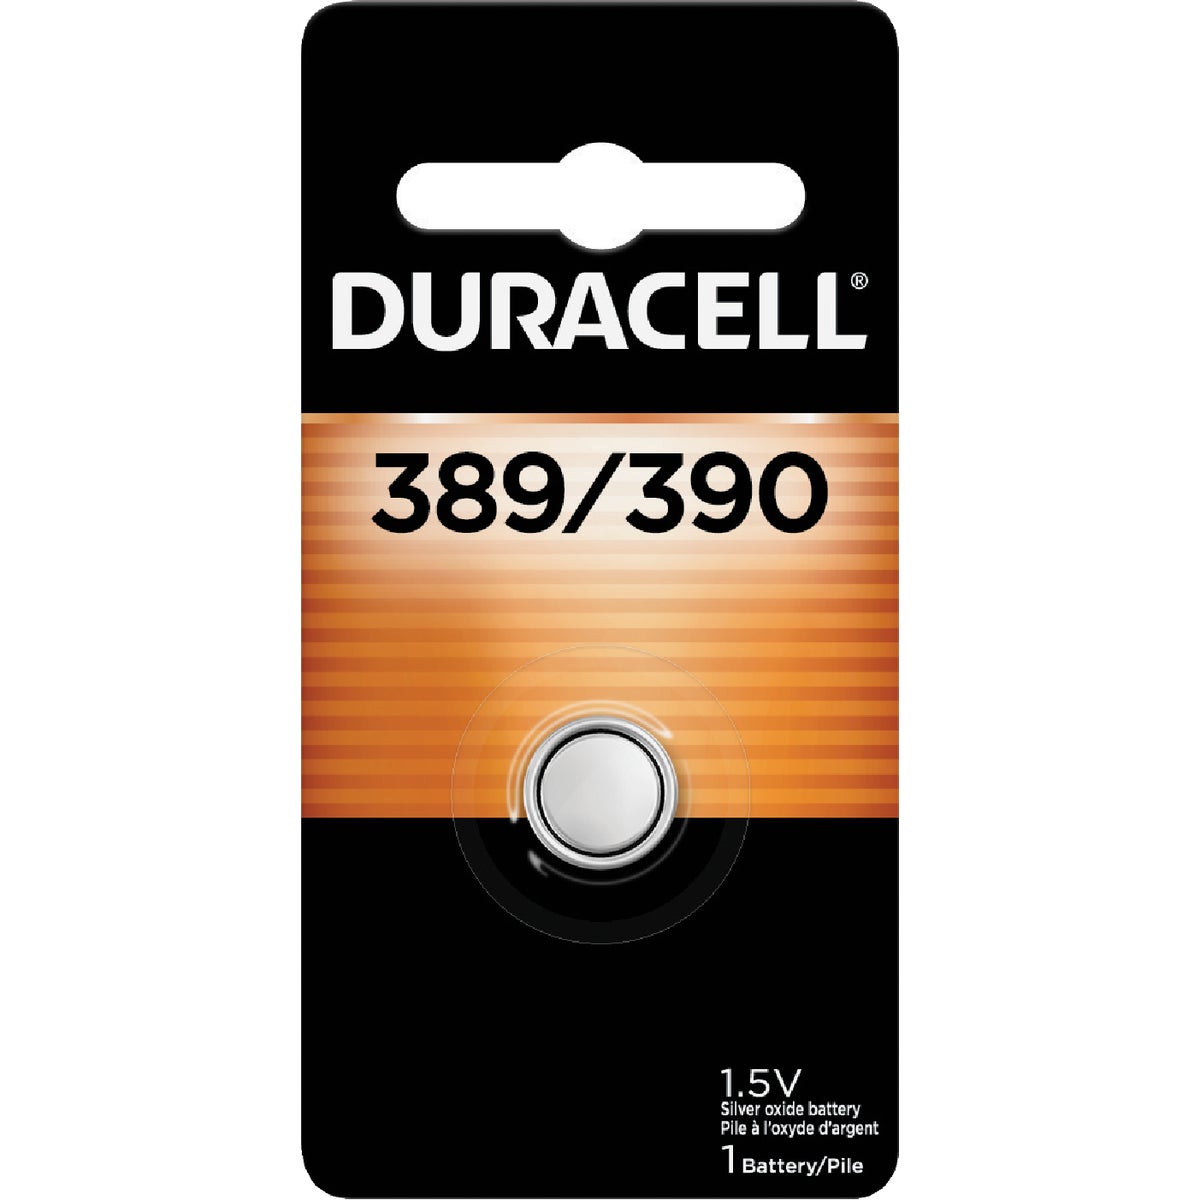 Duracell 389/390 Silver Oxide Button Cell Battery